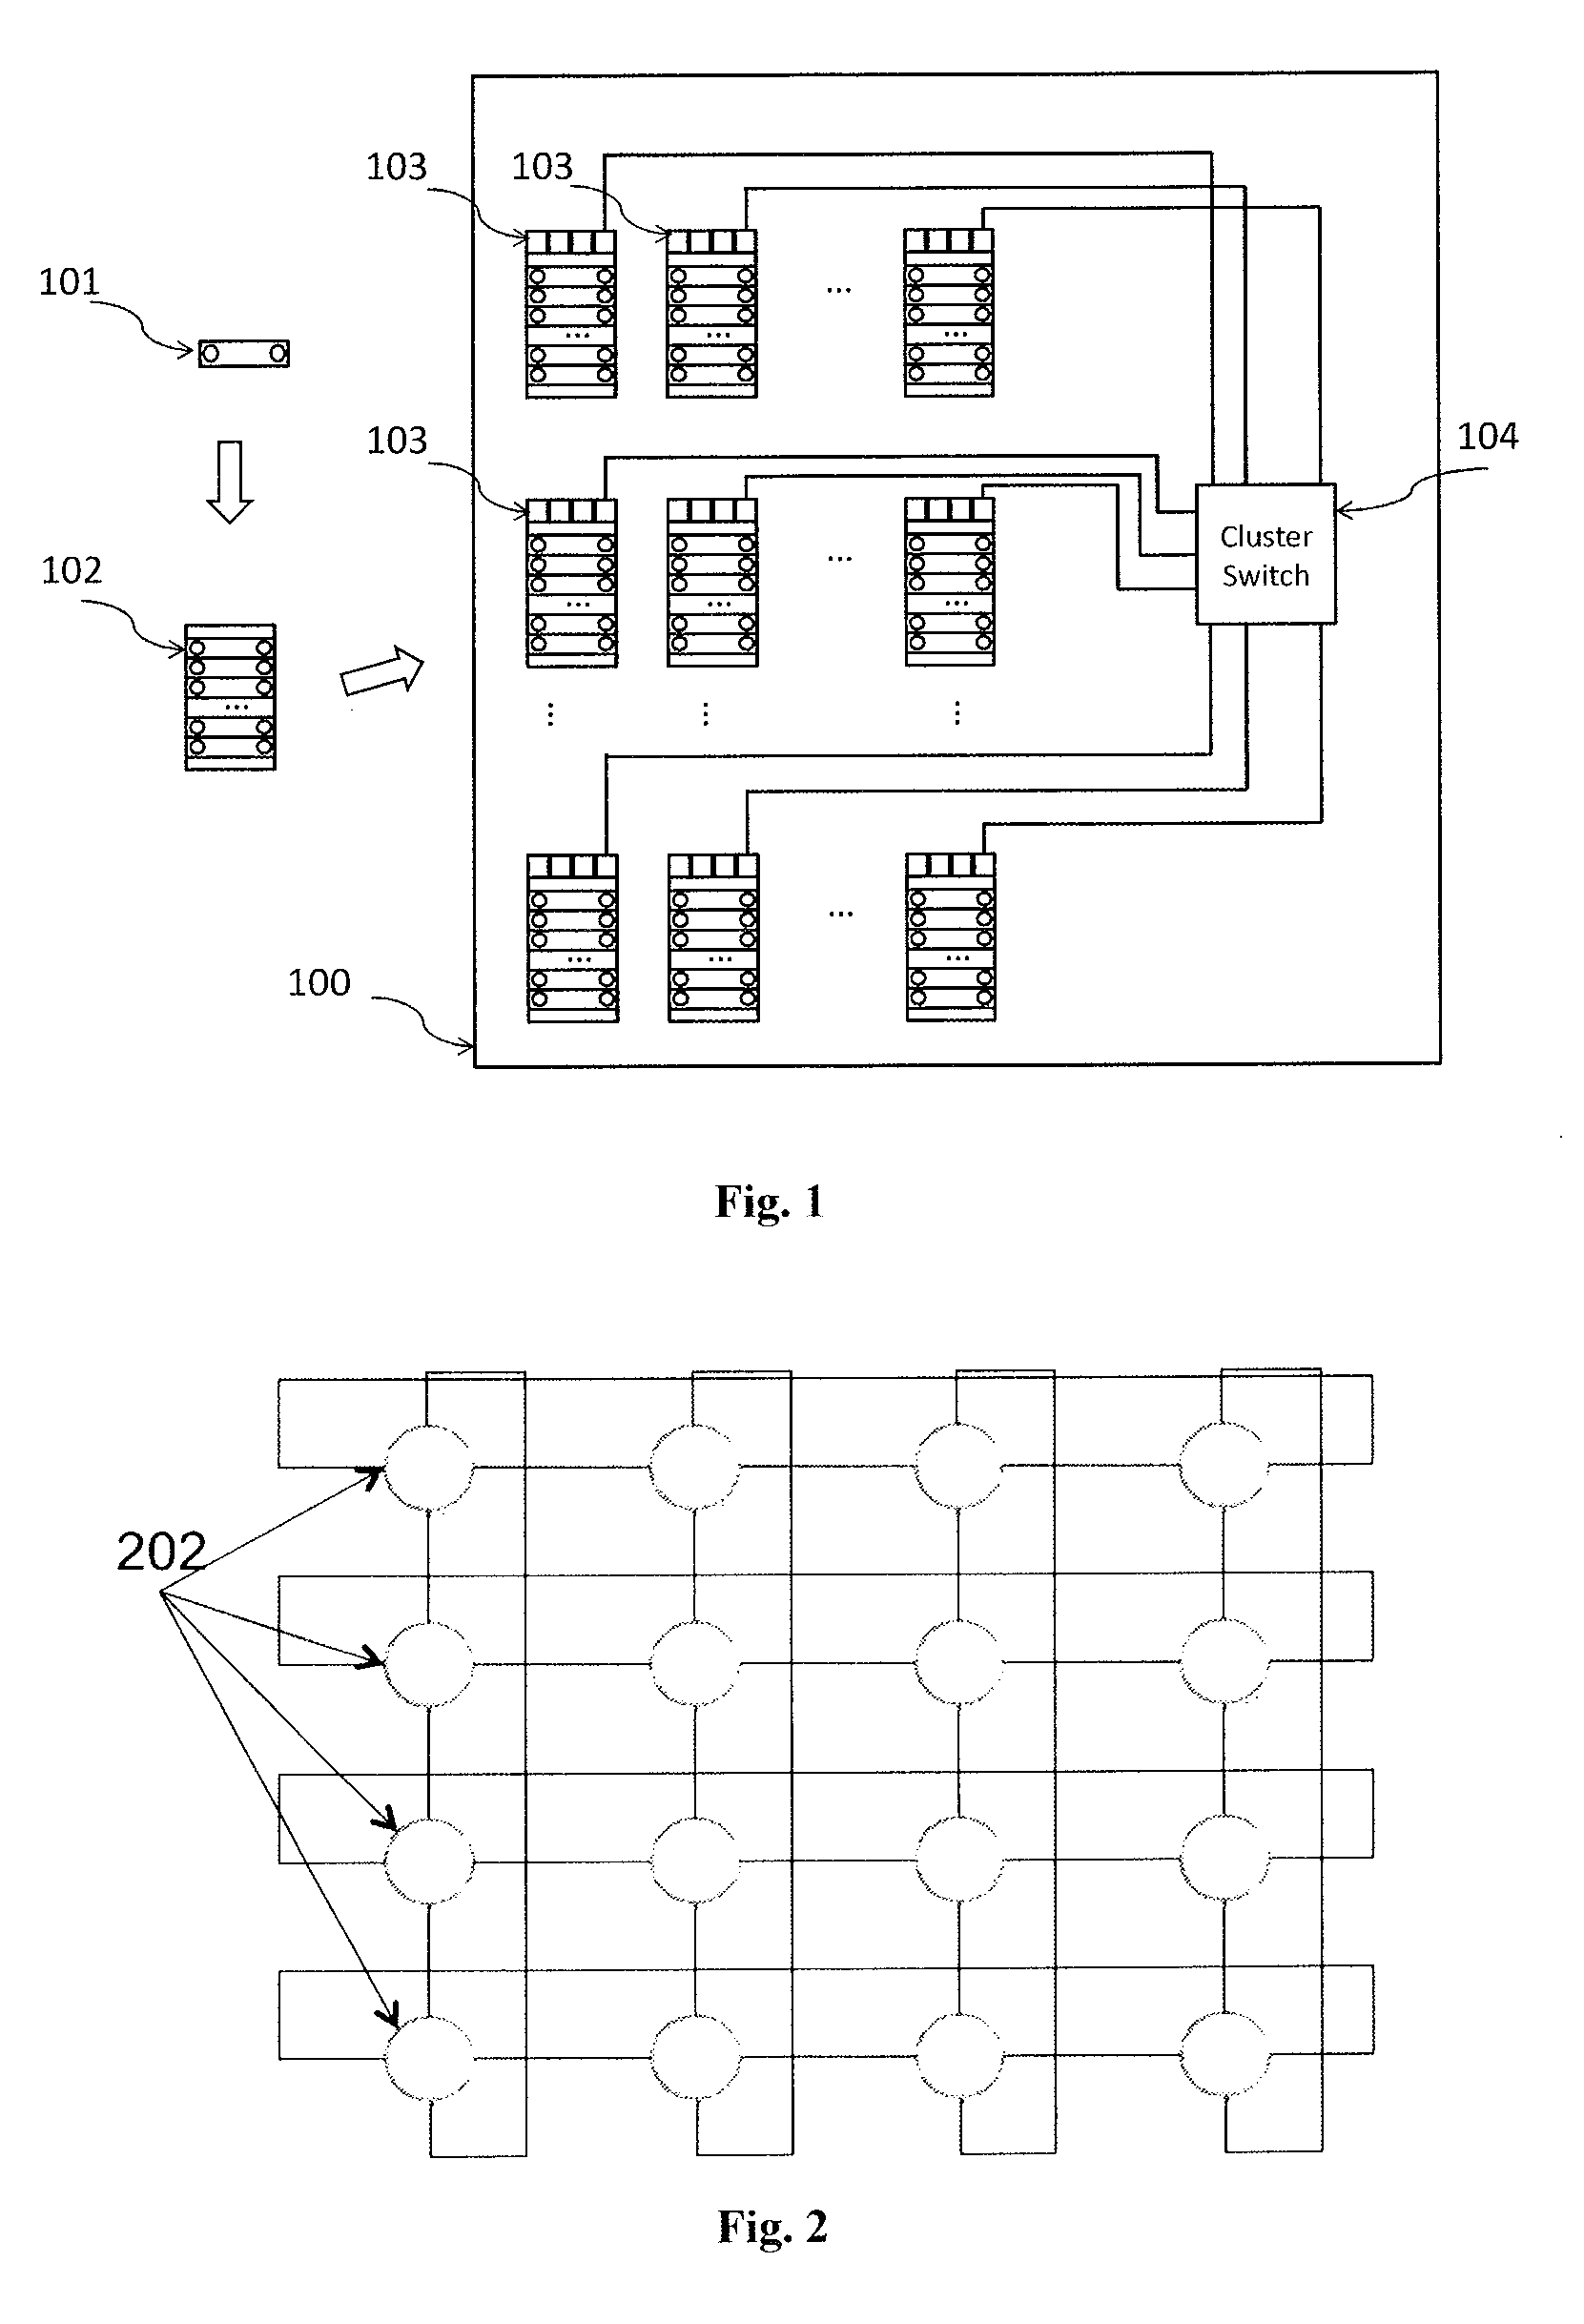 Method and apparatus for implementing a multi-dimensional optical circuit switching fabric